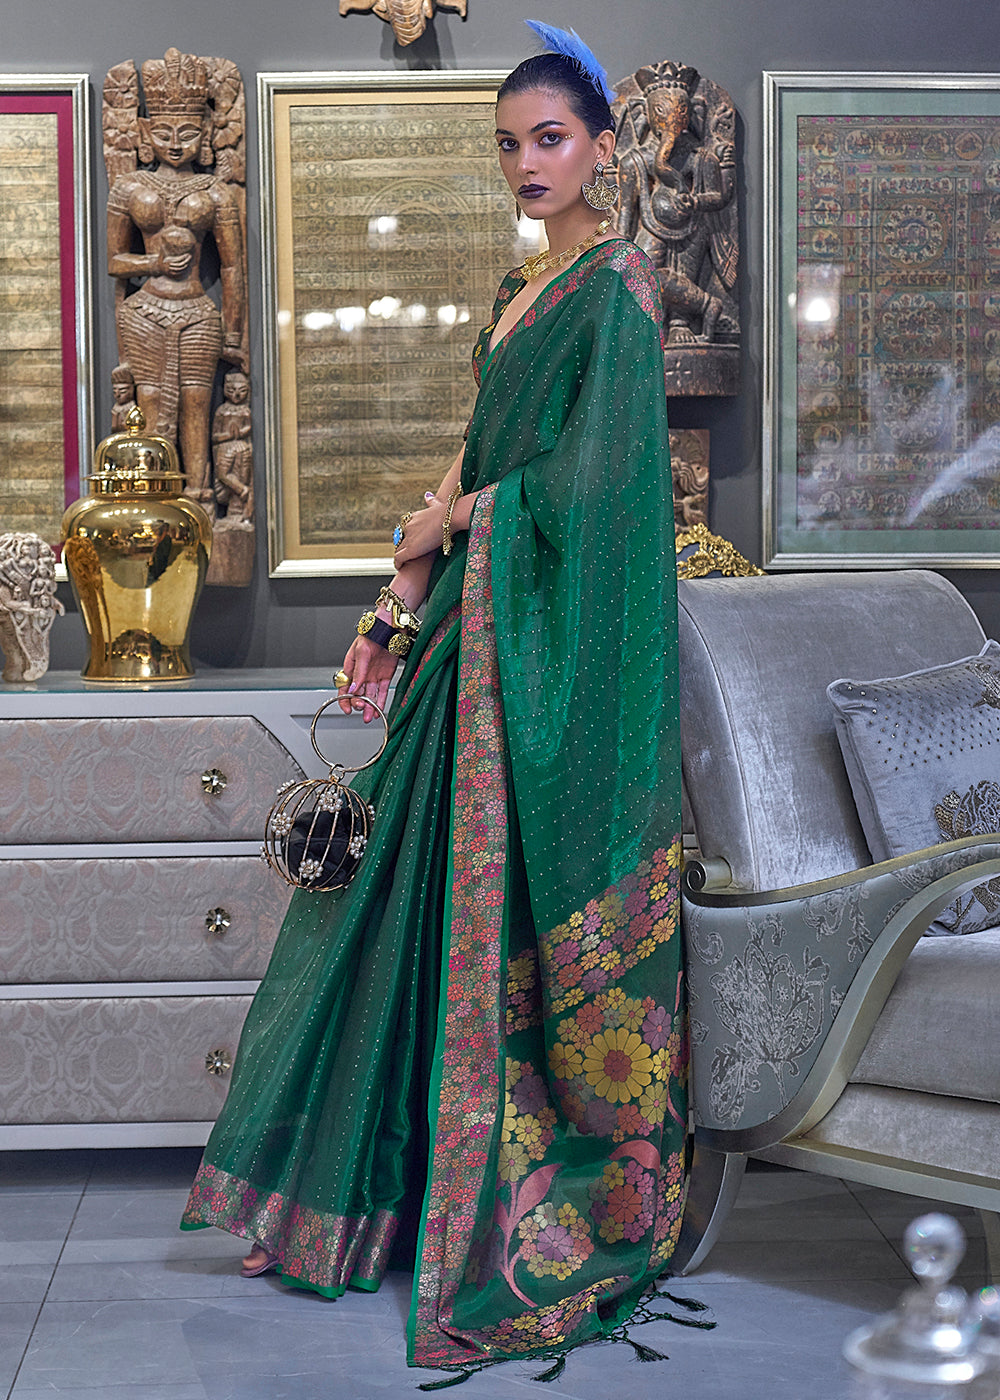 Buy Now Festive Look Enormous Green Dual Tone Organza Silk Saree Online in USA, UK, Canada & Worldwide at Empress Clothing.